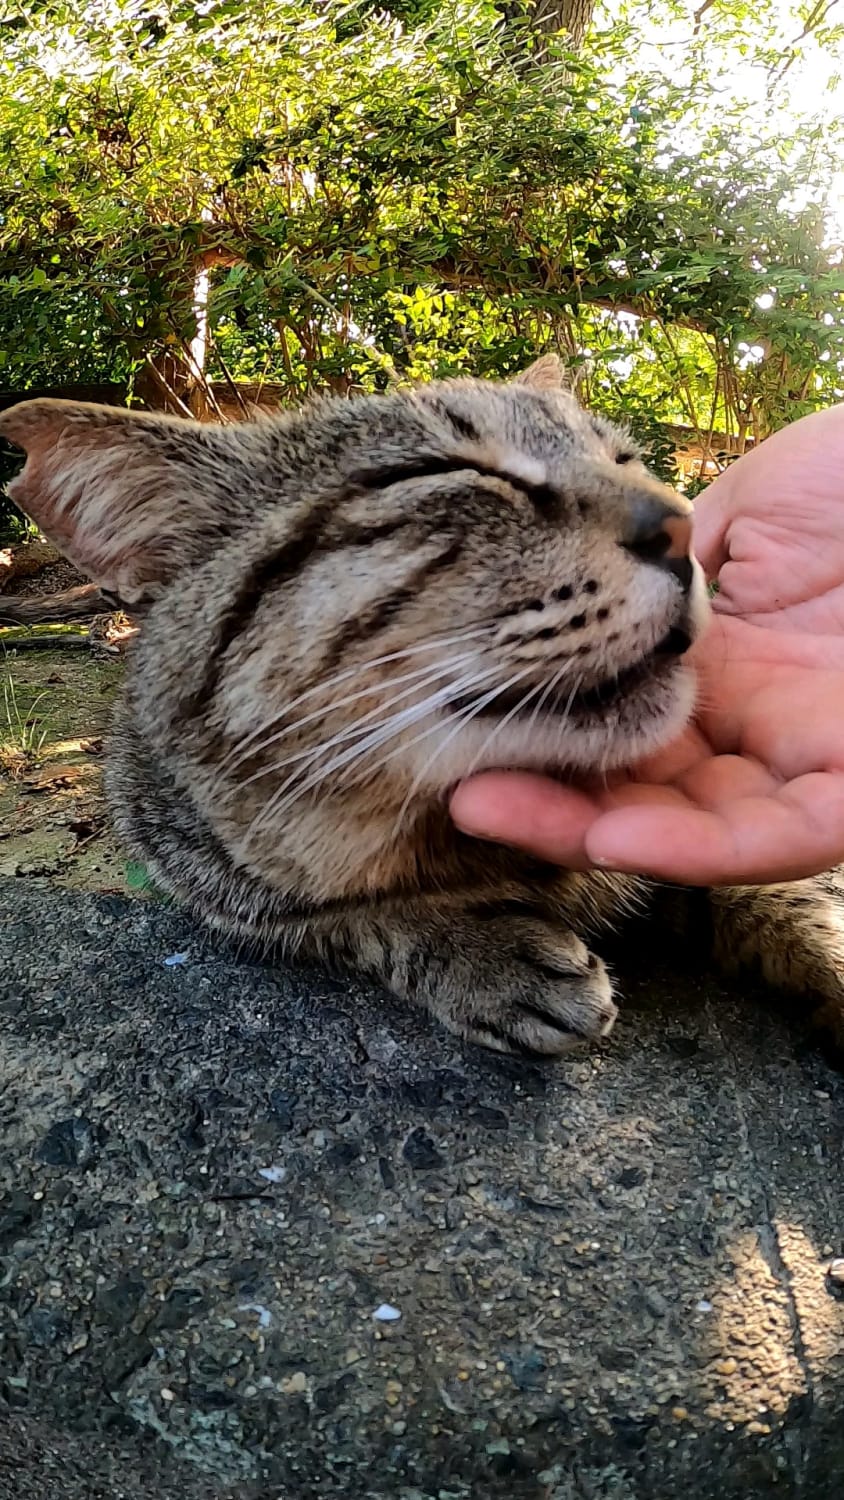 Stray cats are pleased to be stroked